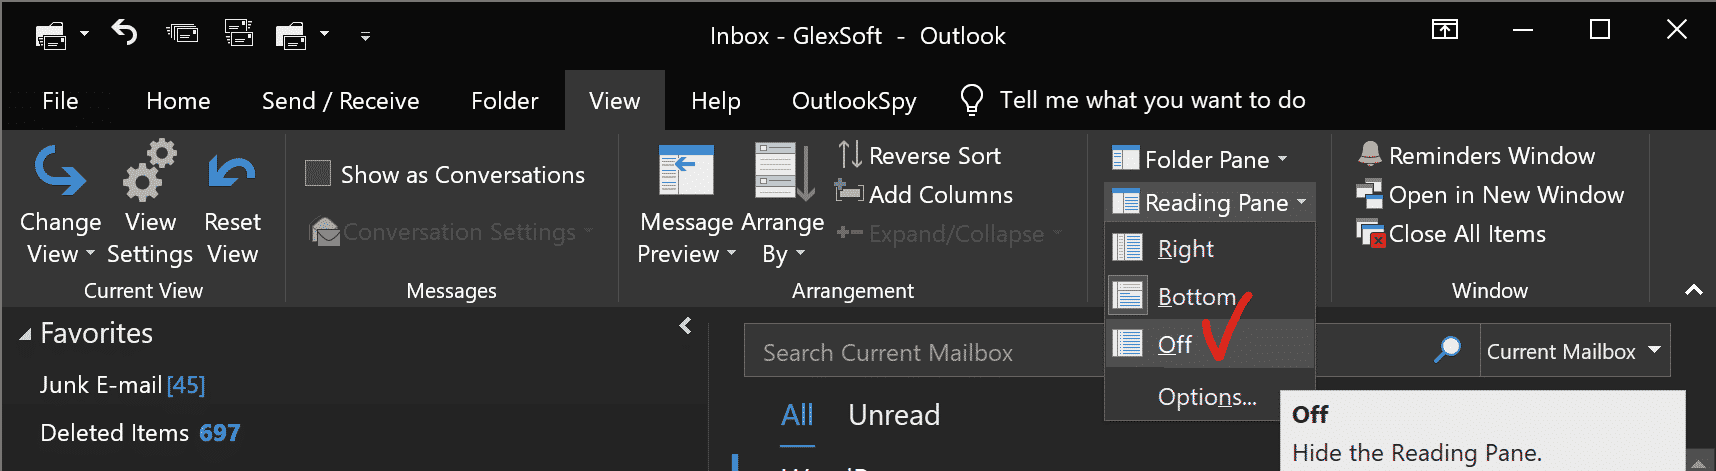 Outlook Turning off the Reading Panel